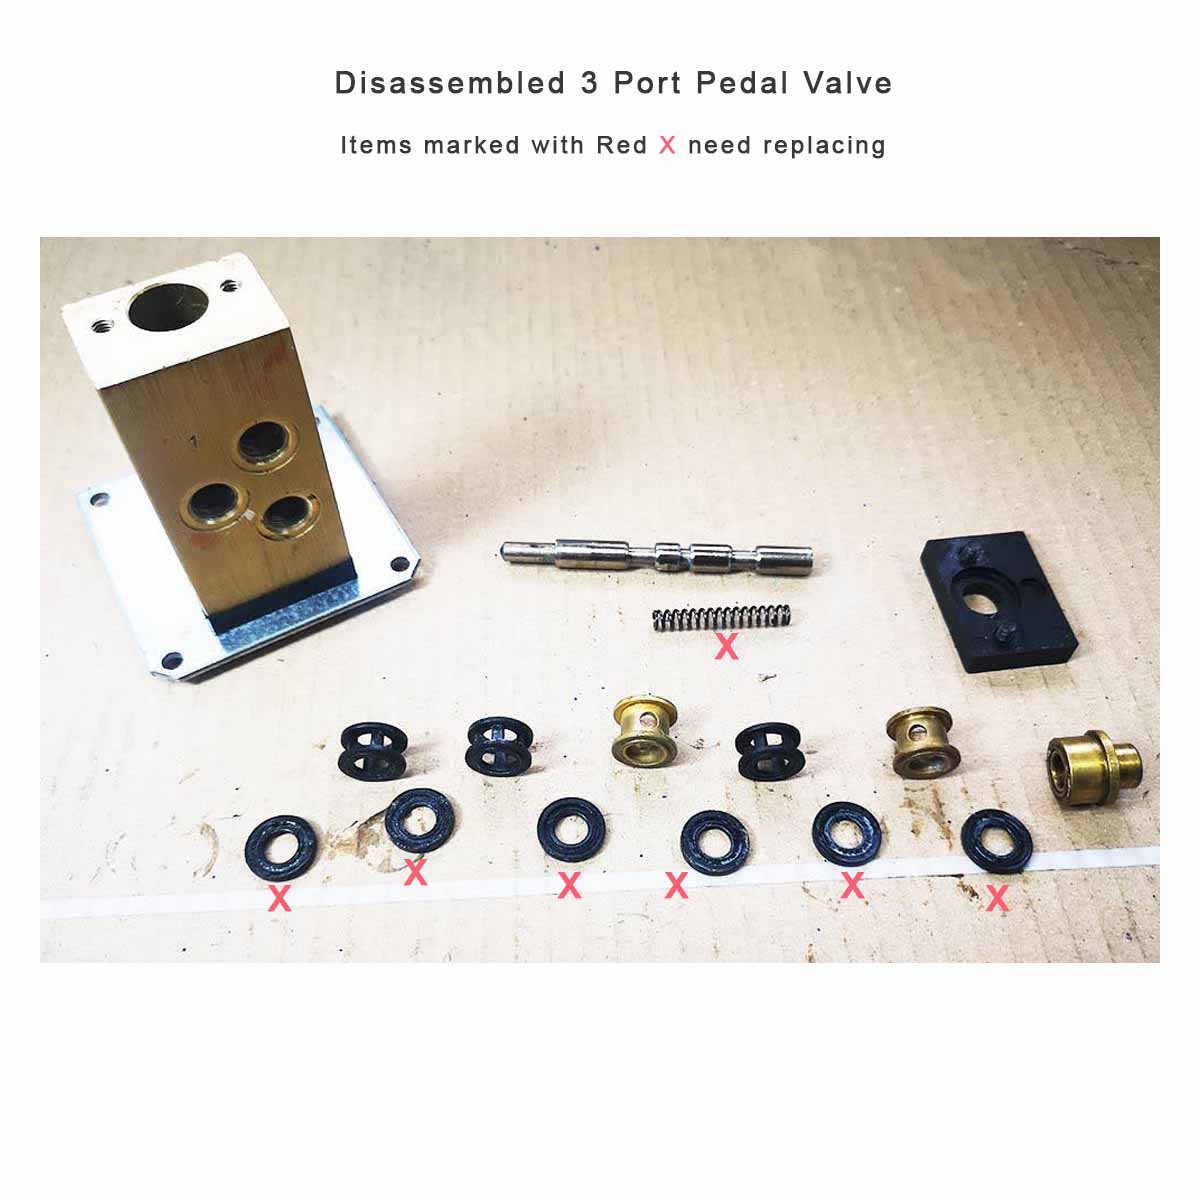 Disassembled pedal valve - Underpinner Spares